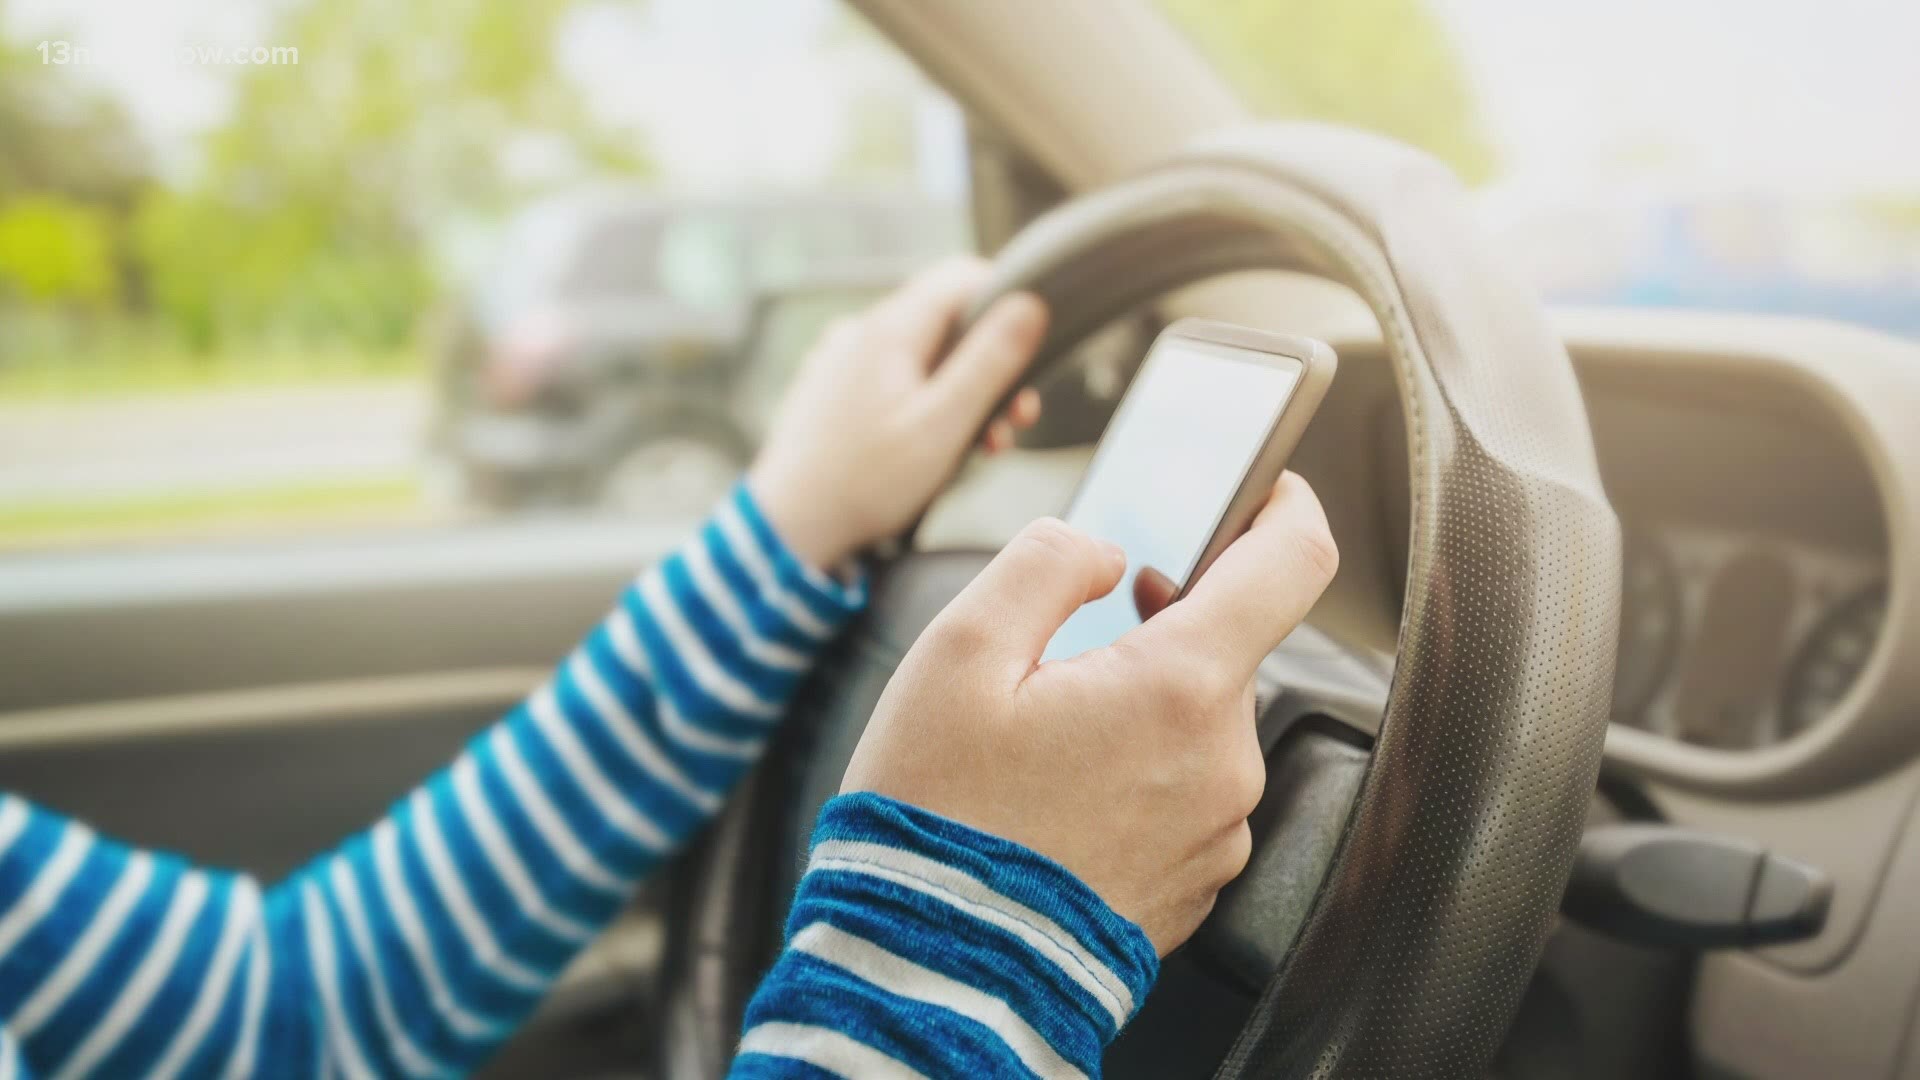 Last year, in Virginia, there were more than 23,000 crashes caused by device-related distracted driving. People can be pulled over for holding a phone while driving.